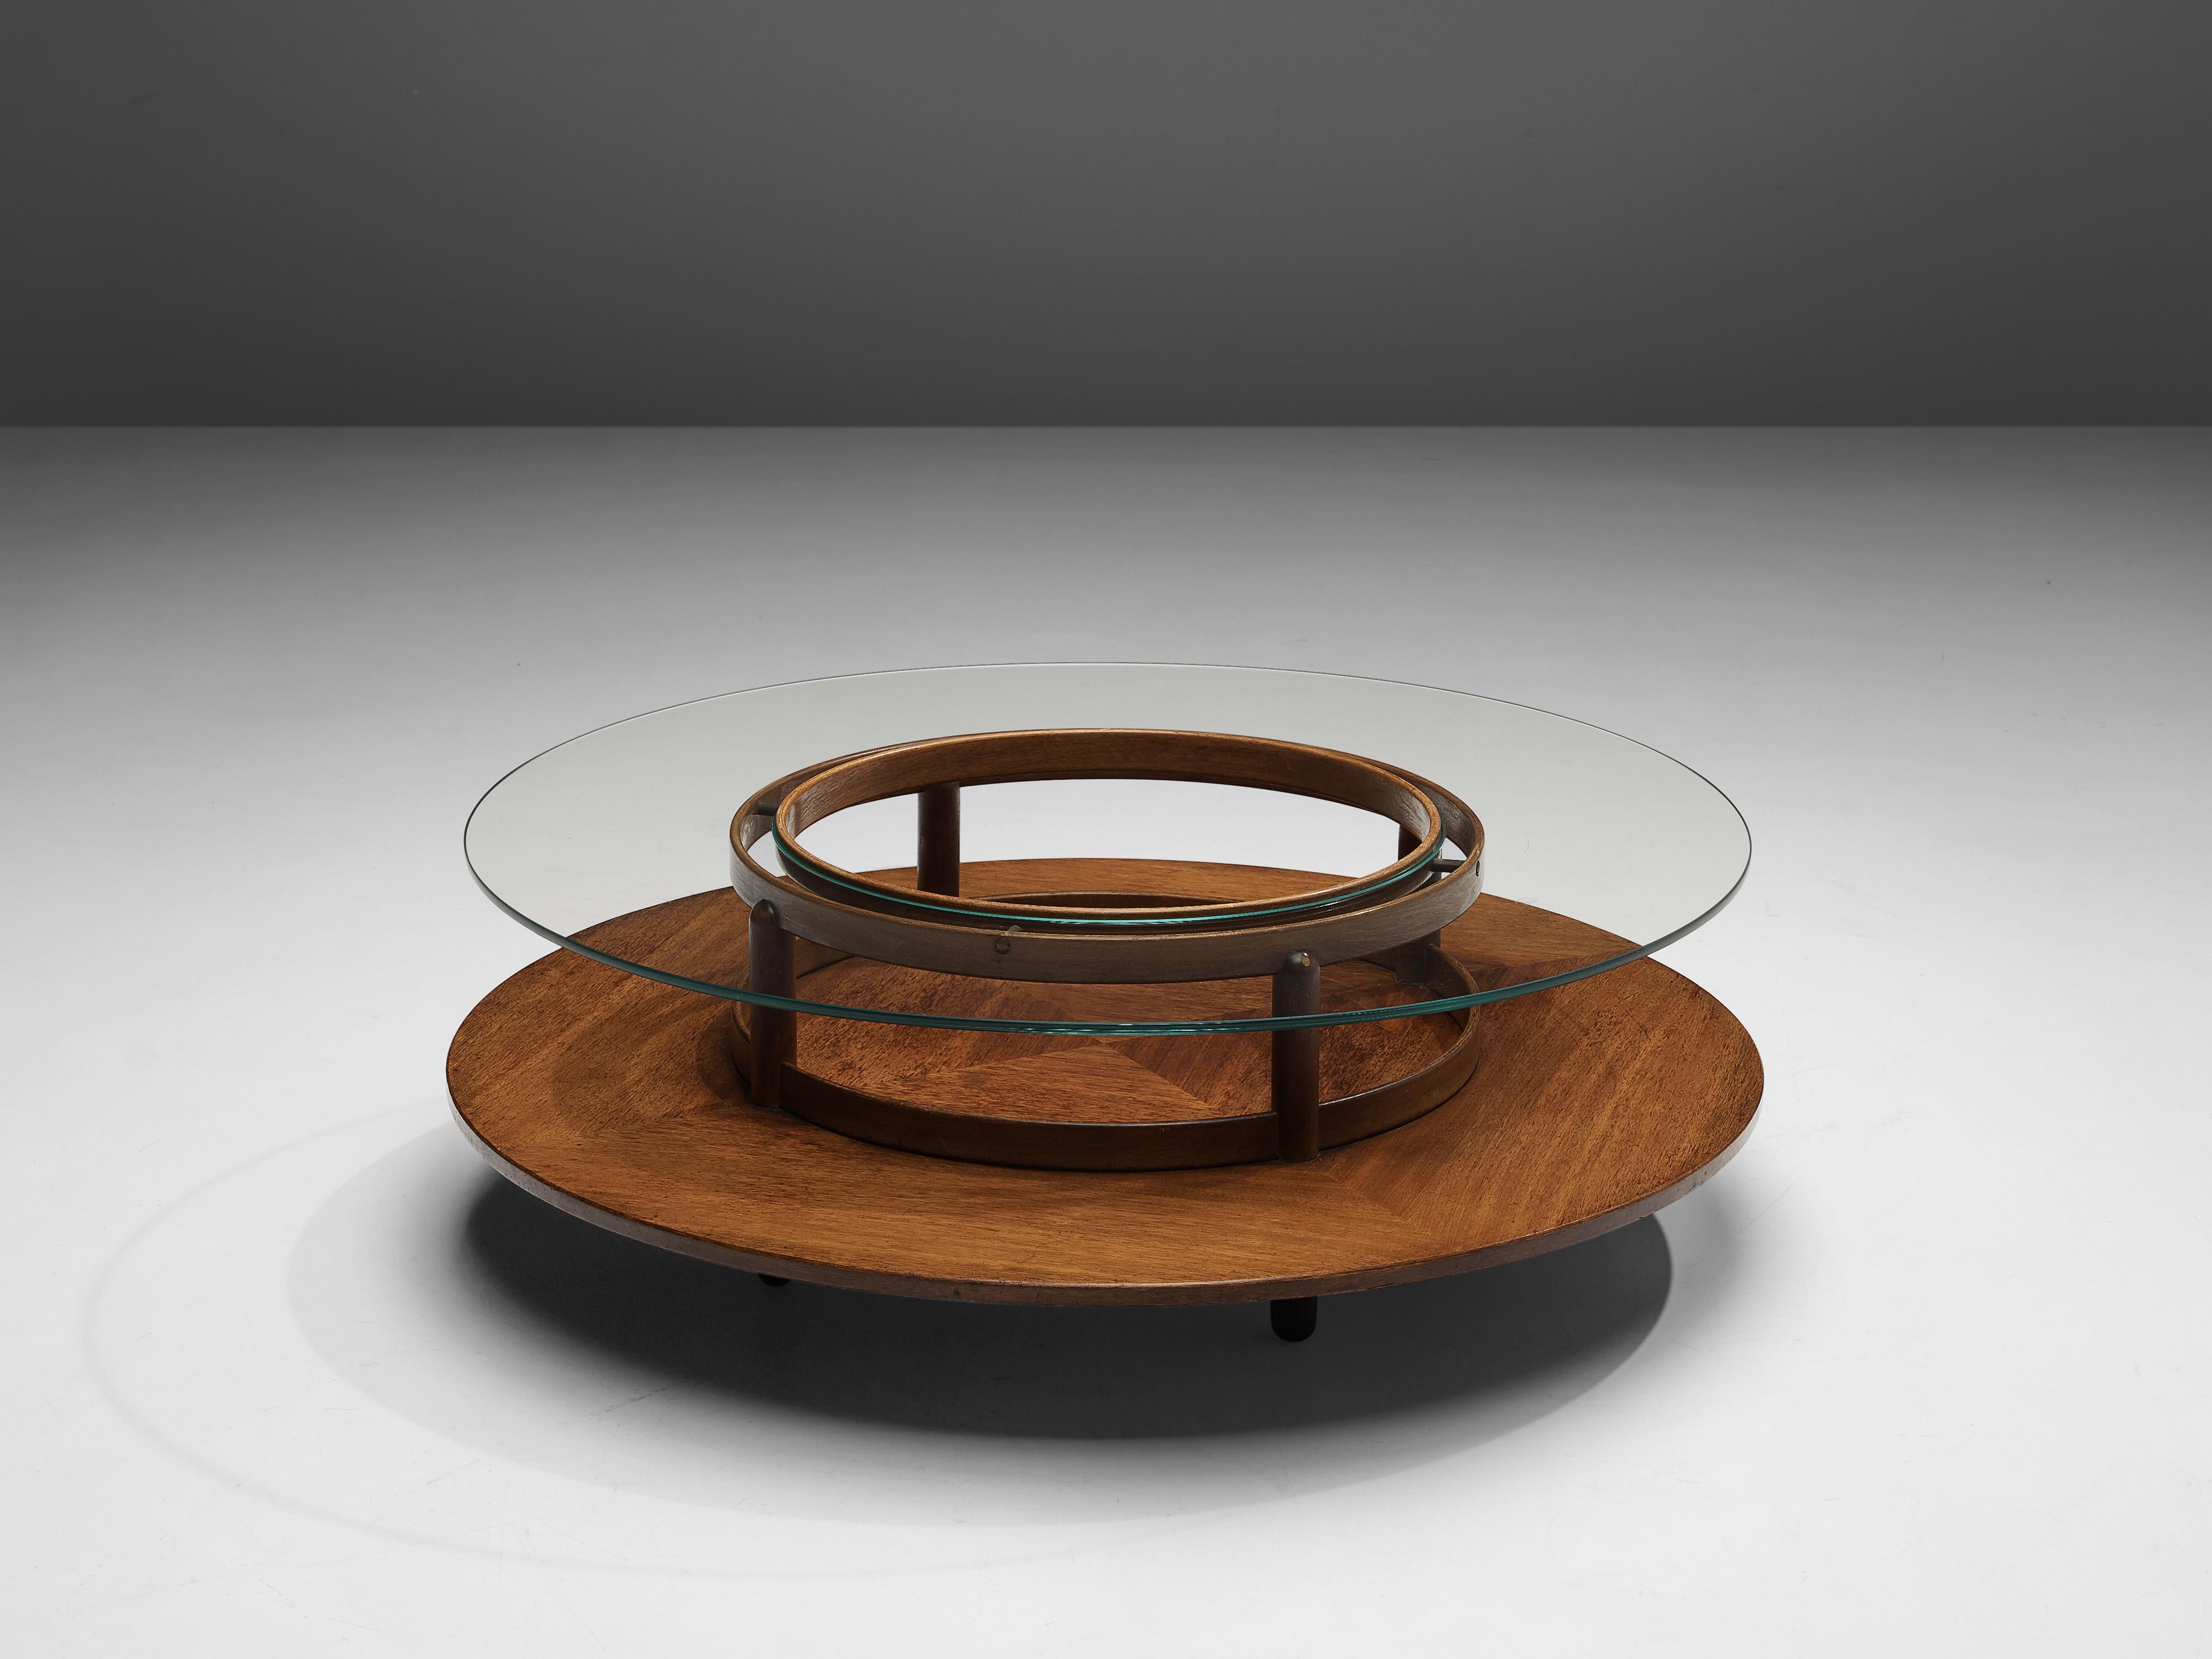 Gianfranco Frattini for Cassina, round coffee table, walnut, glass, Italy, 1950s

Beautiful coffee table in glass and walnut by Italian designer Gianfranco Frattini for Cassina. This table has an interesting design. A round top in glass exposes